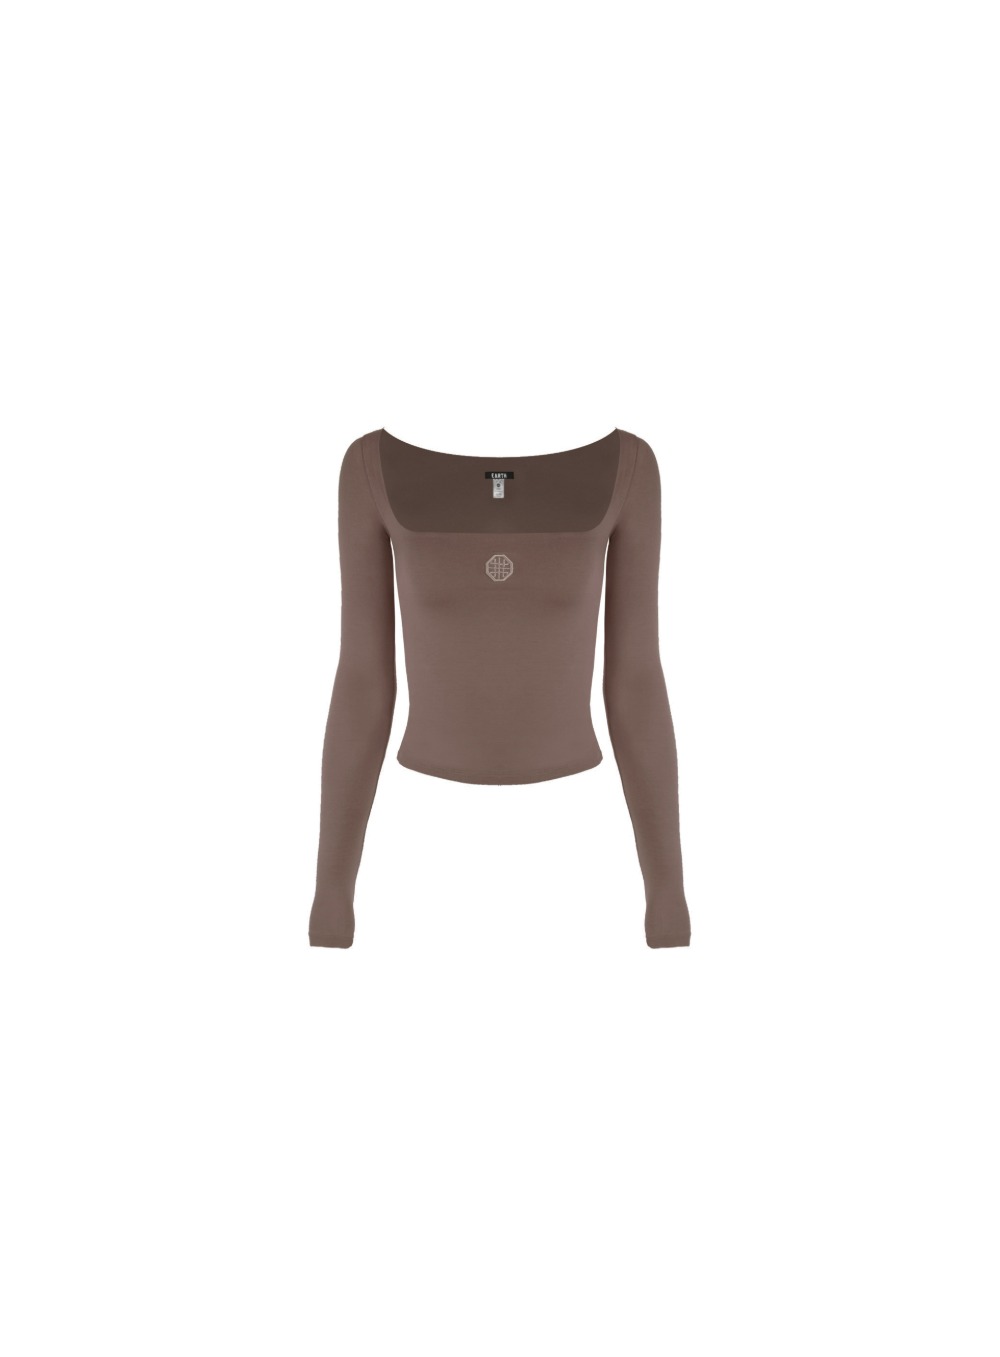 Square Neck Long Sleeve - Taupe